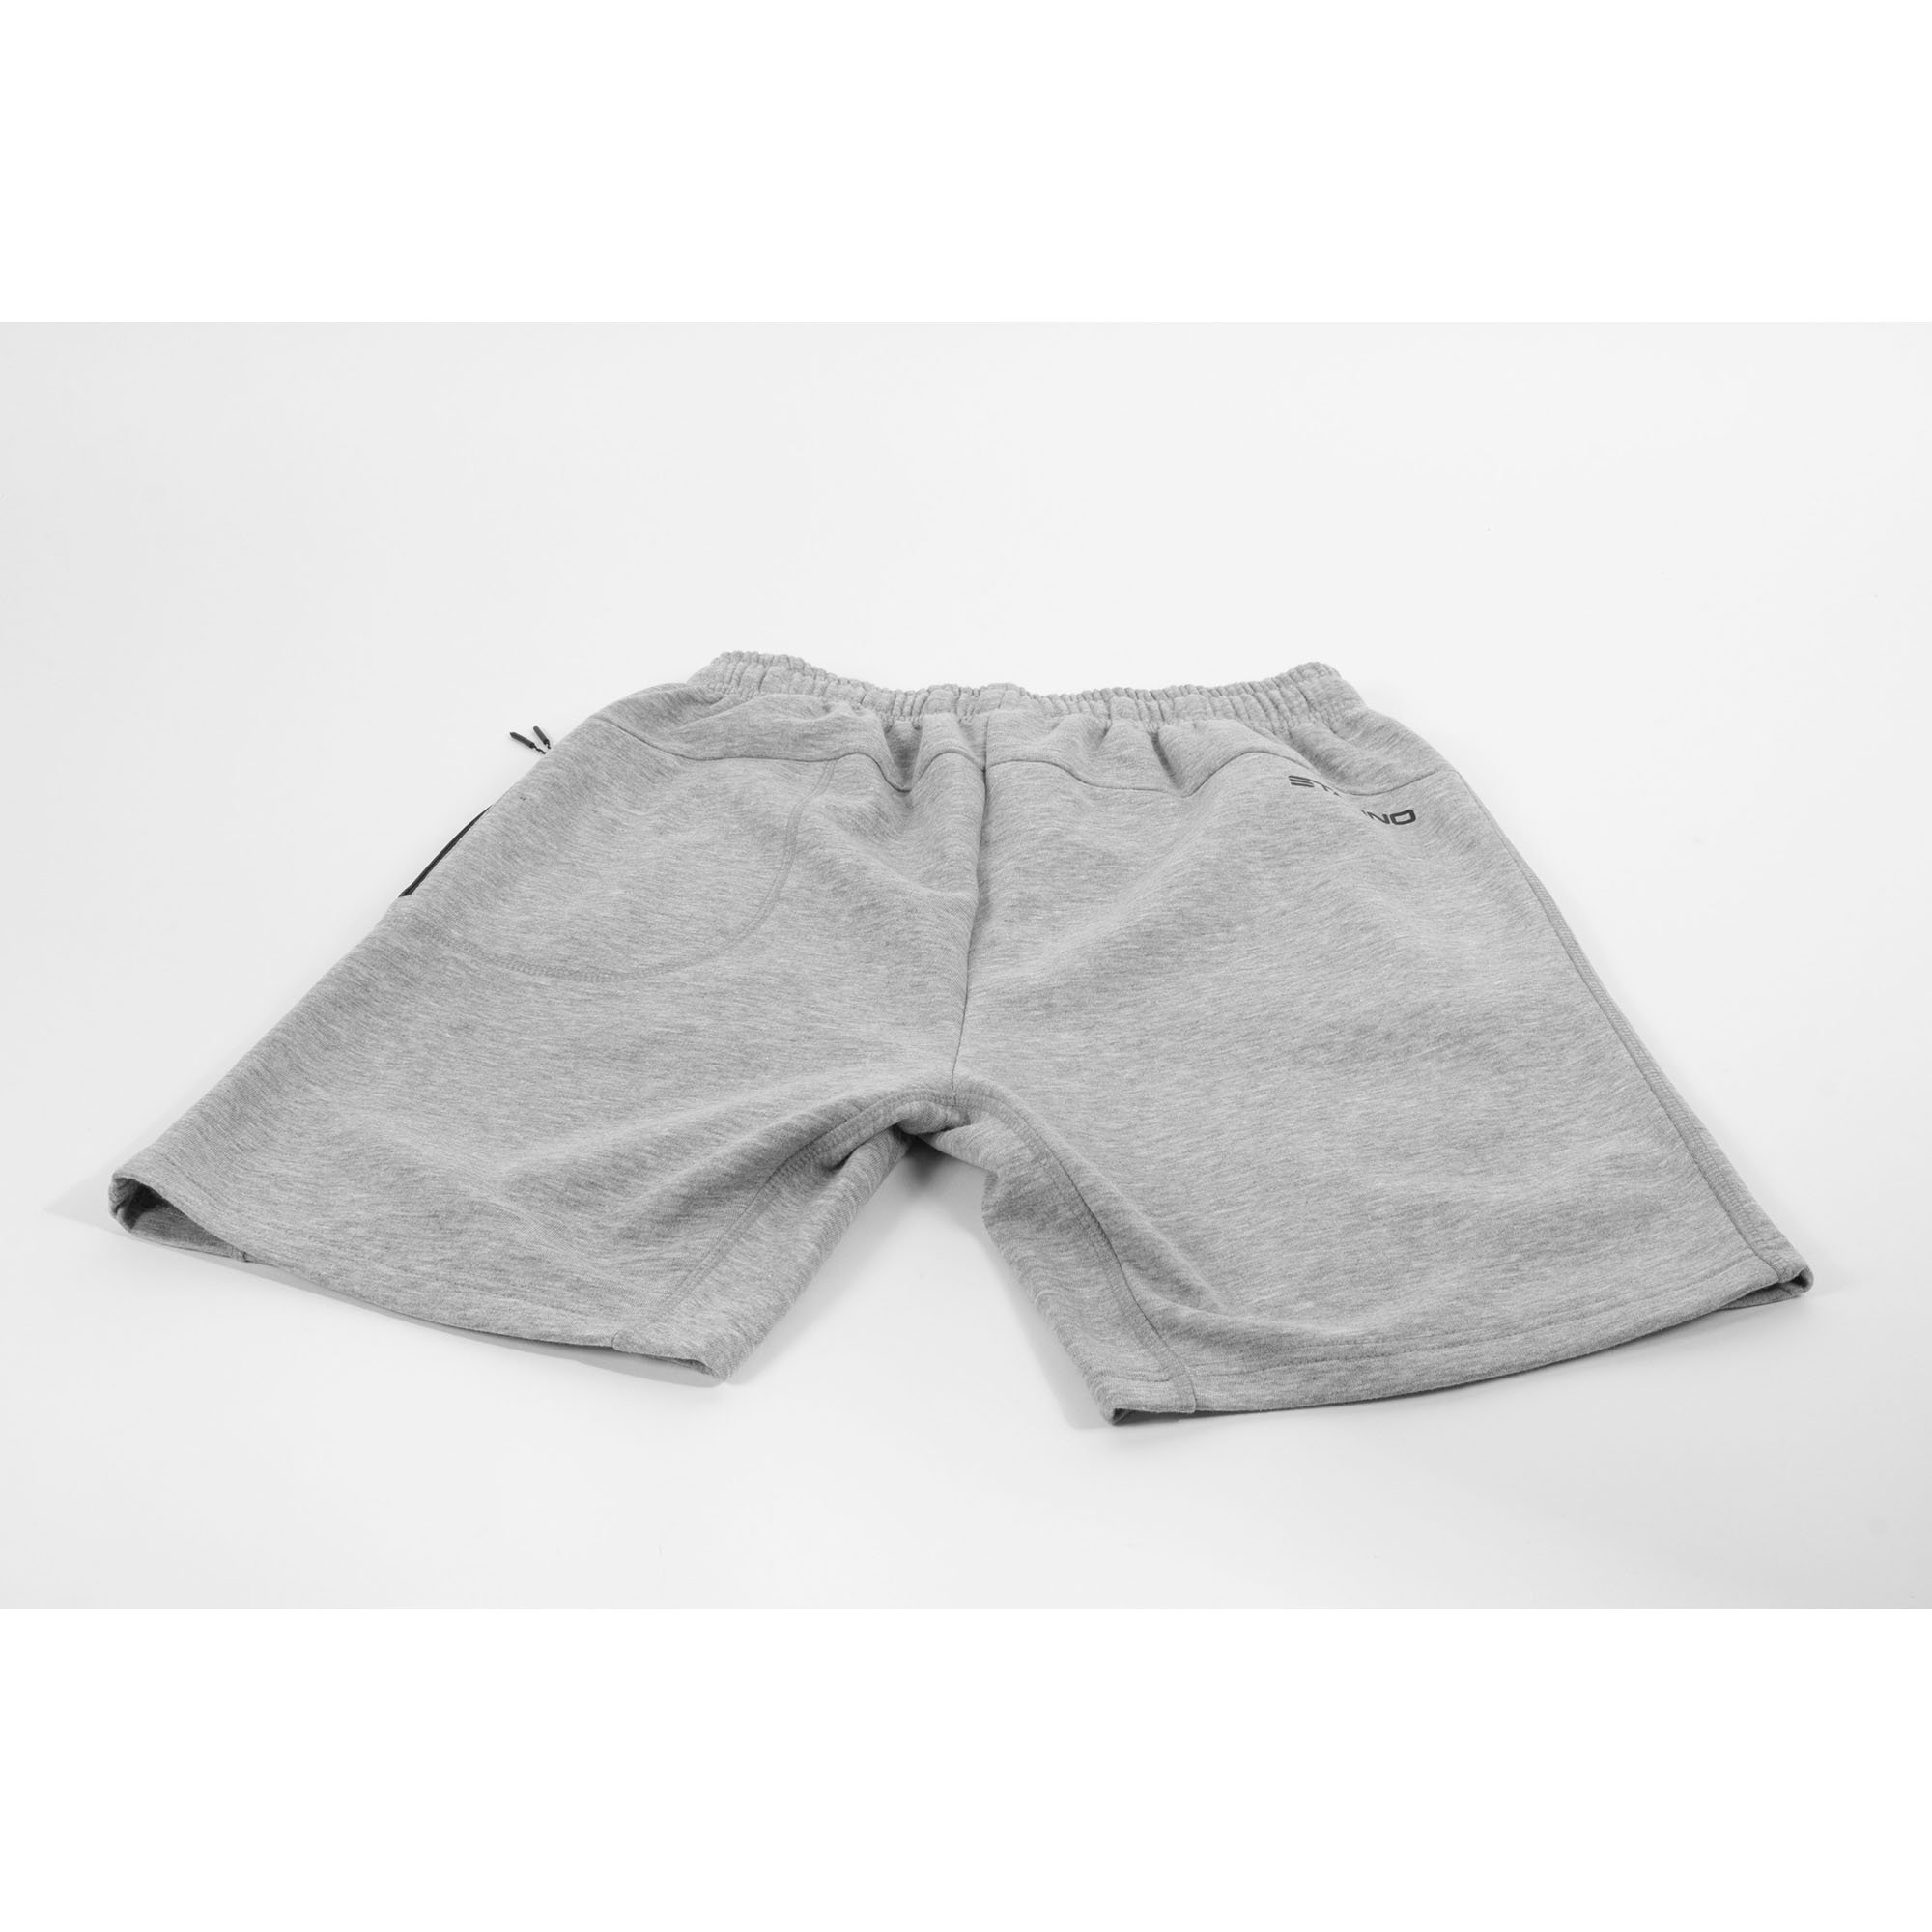 Stanno Ease Sweat Short